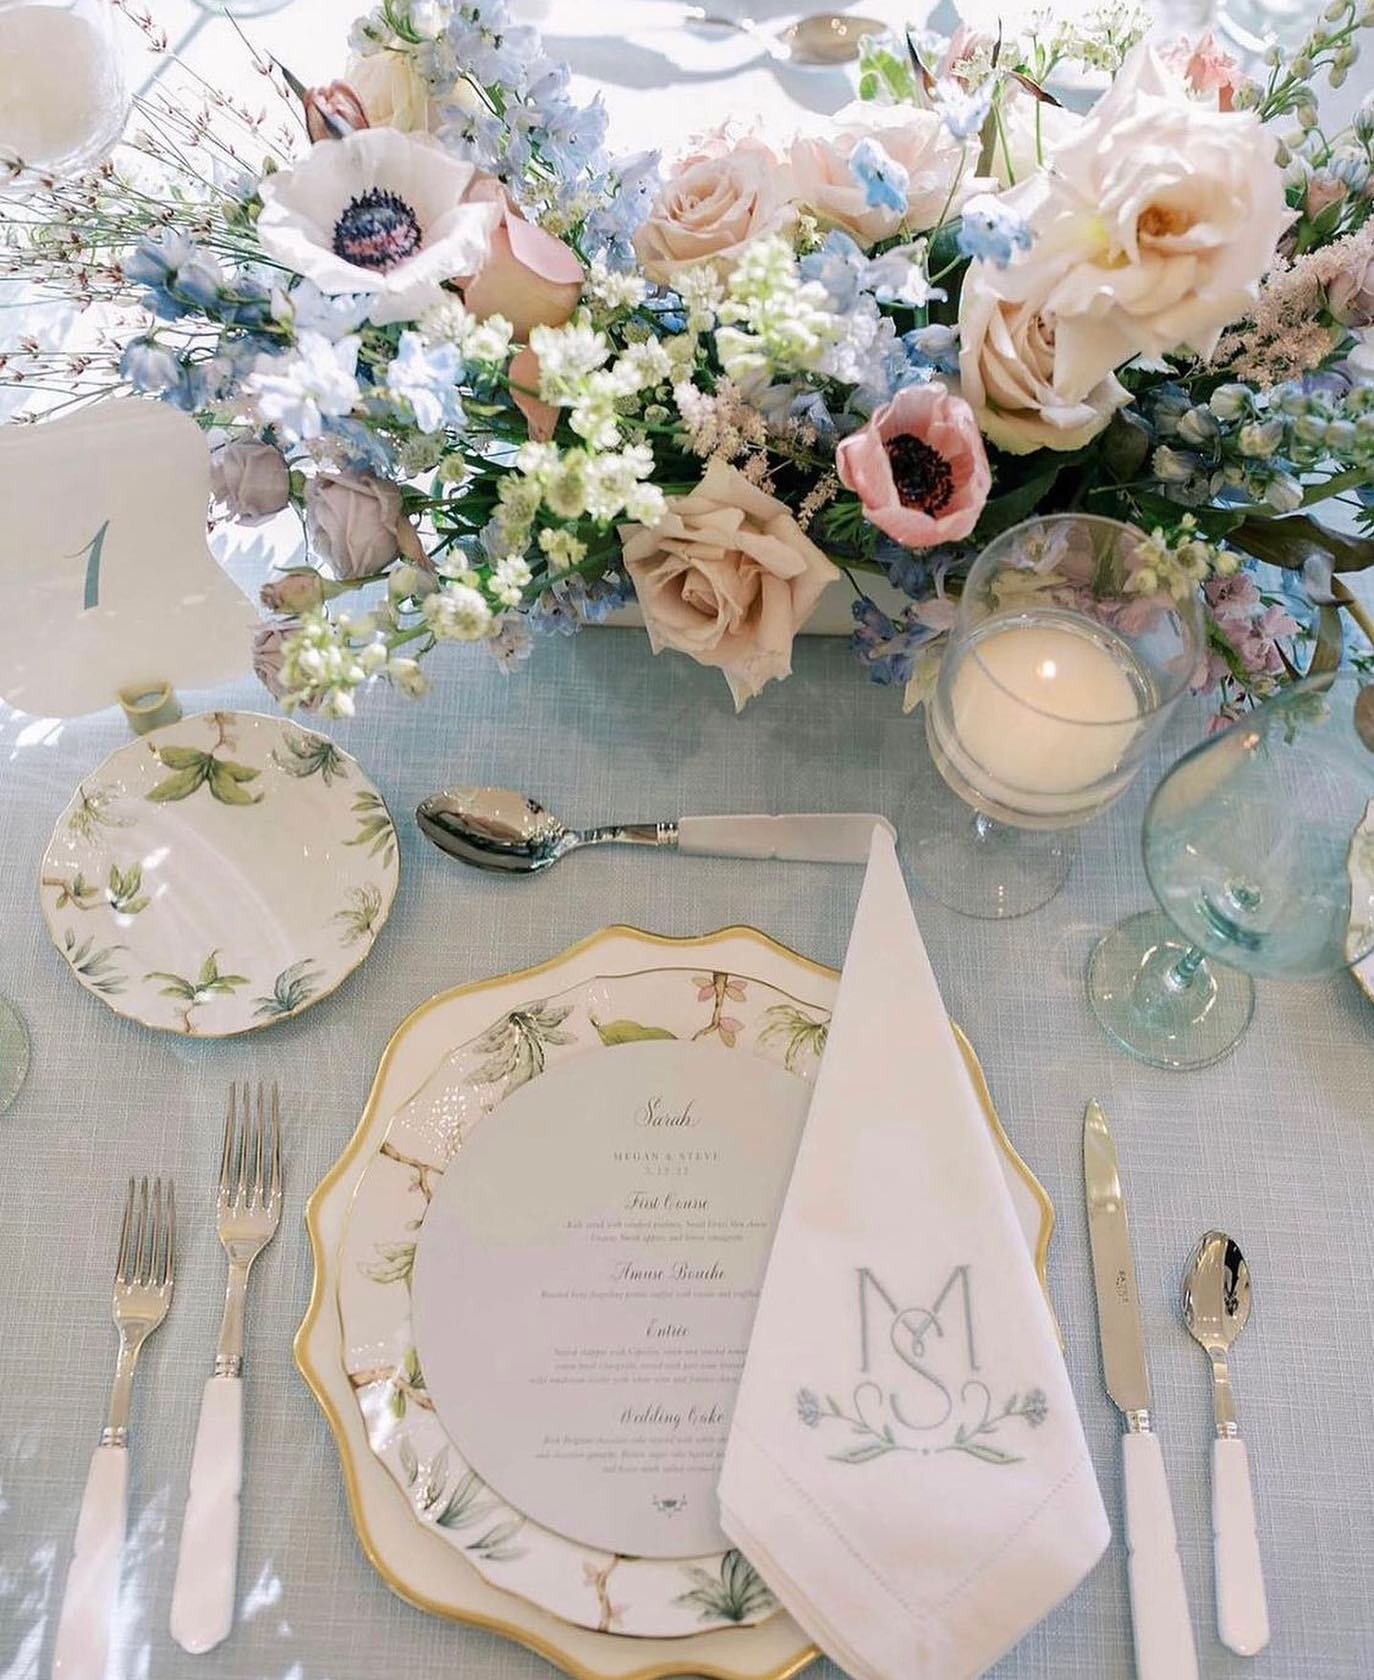 Heart eyes galore on this whole entire table 😍. Bride @meg_roth had a vision from the beginning and how perfectly it was executed here by a fabulous team. @toast_events @kberryphoto @boldeventsatl @tresbellefete @herendusa @leenjeanstudios @edgedesi